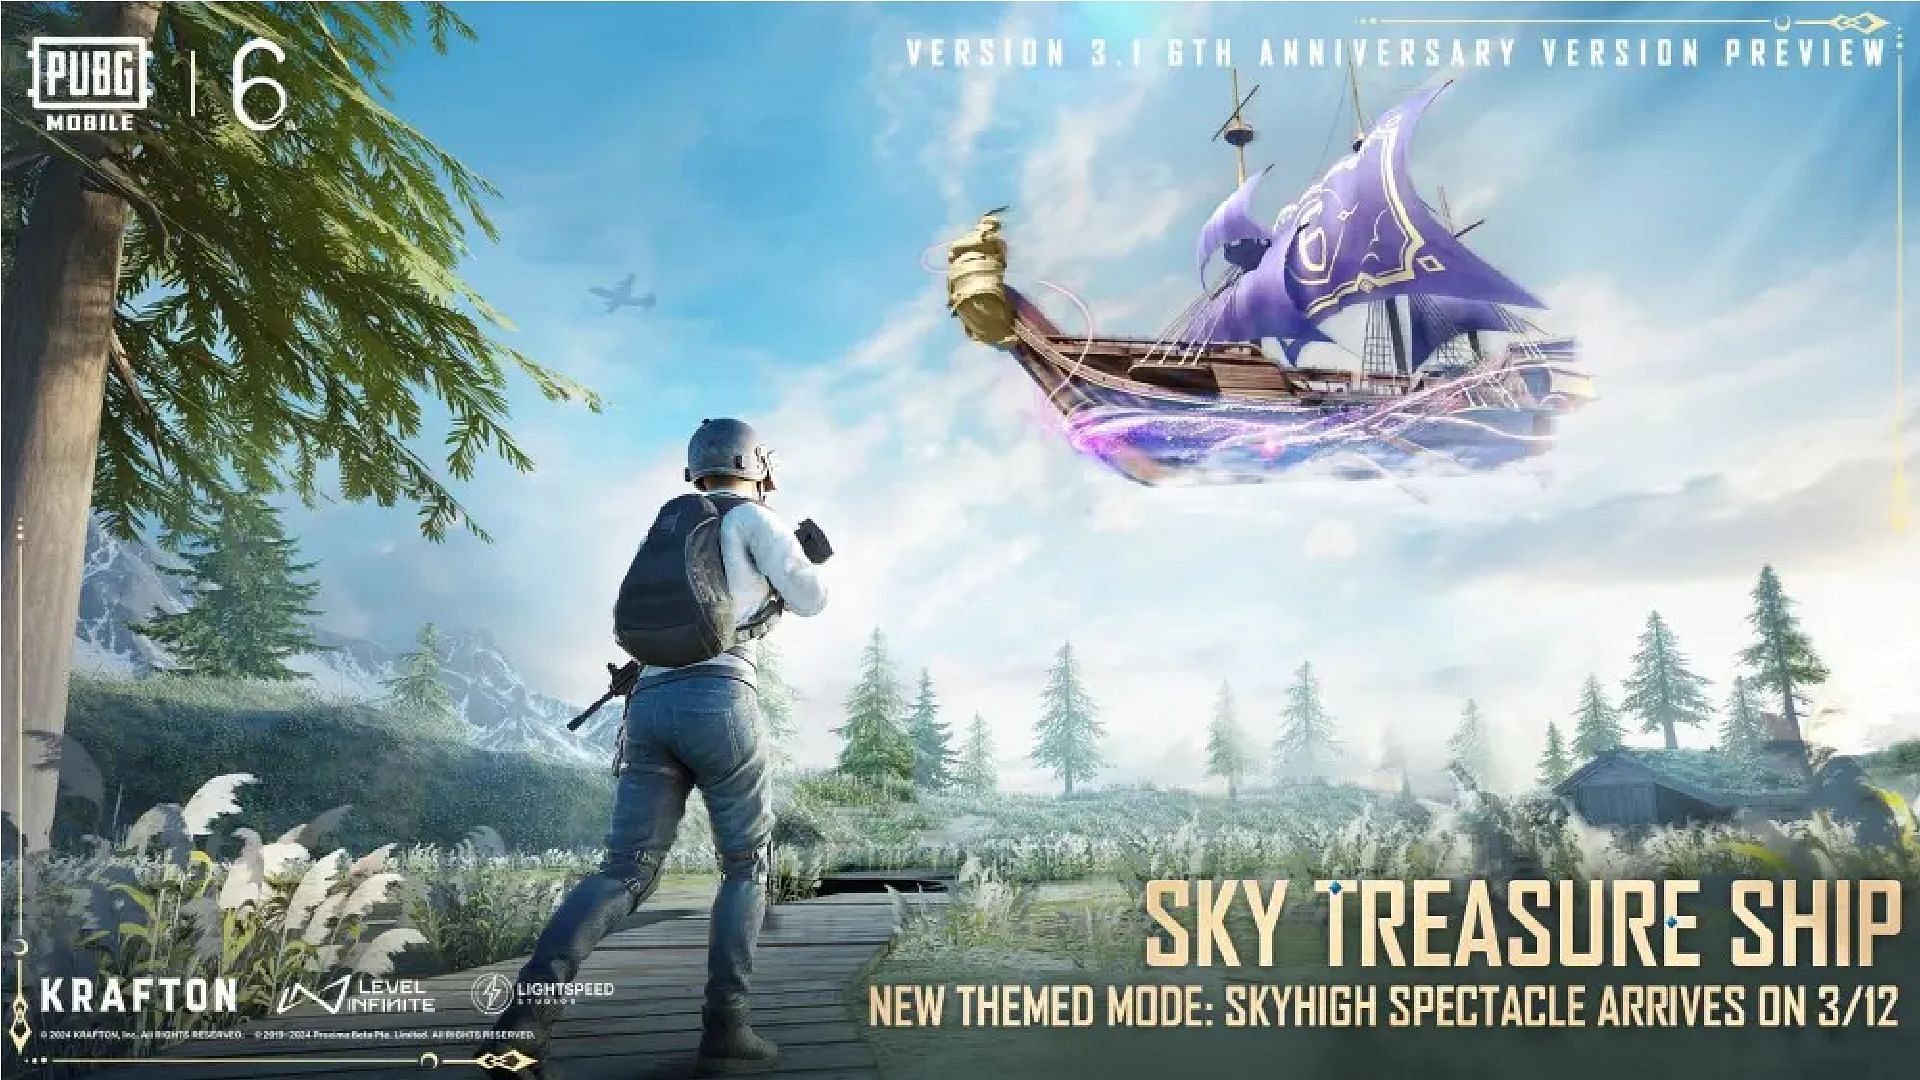 Sky Treasure Ship in the upcoming PUBGM update promised on PUBG Mobile version 3.1 patch notes (Image via Krafton)